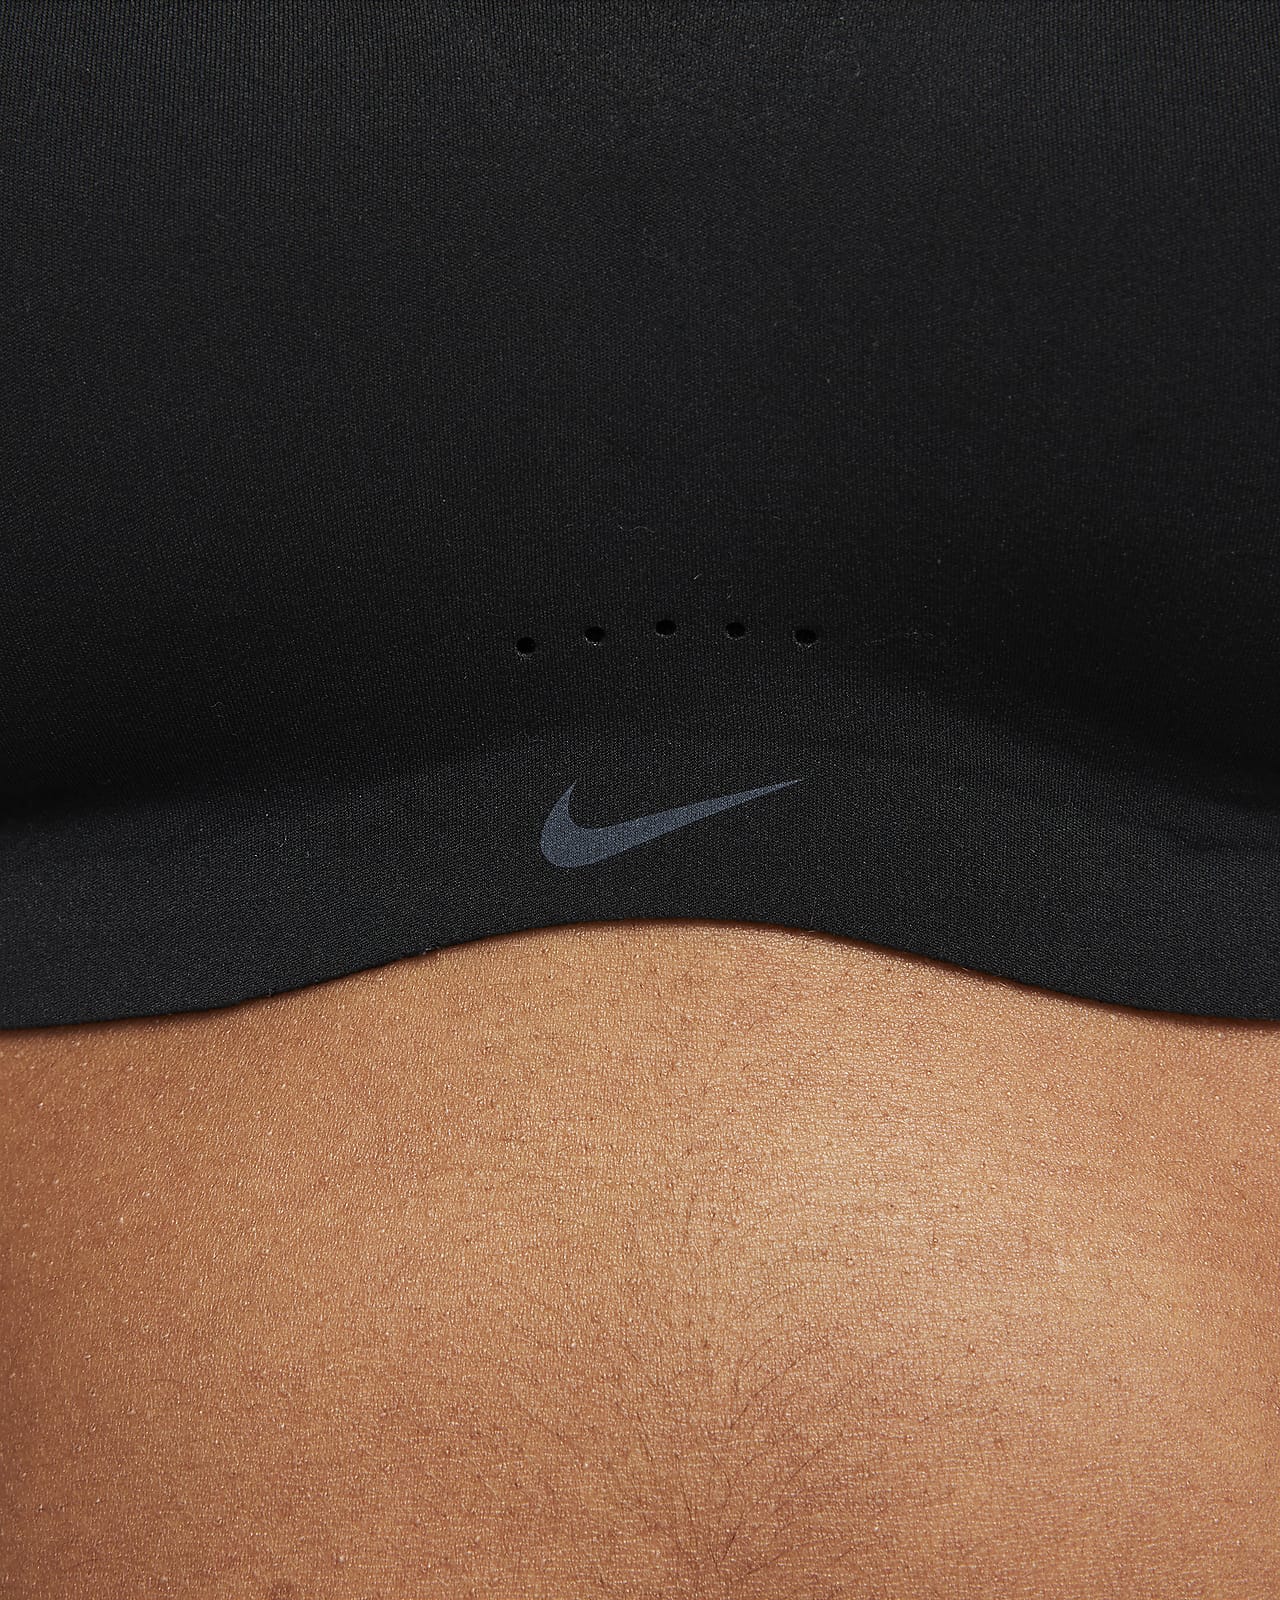 Real talk: Nike Alate just might be THAT sports bra. We asked our Nike Alate  models what they thought of the bra, and here's what we he